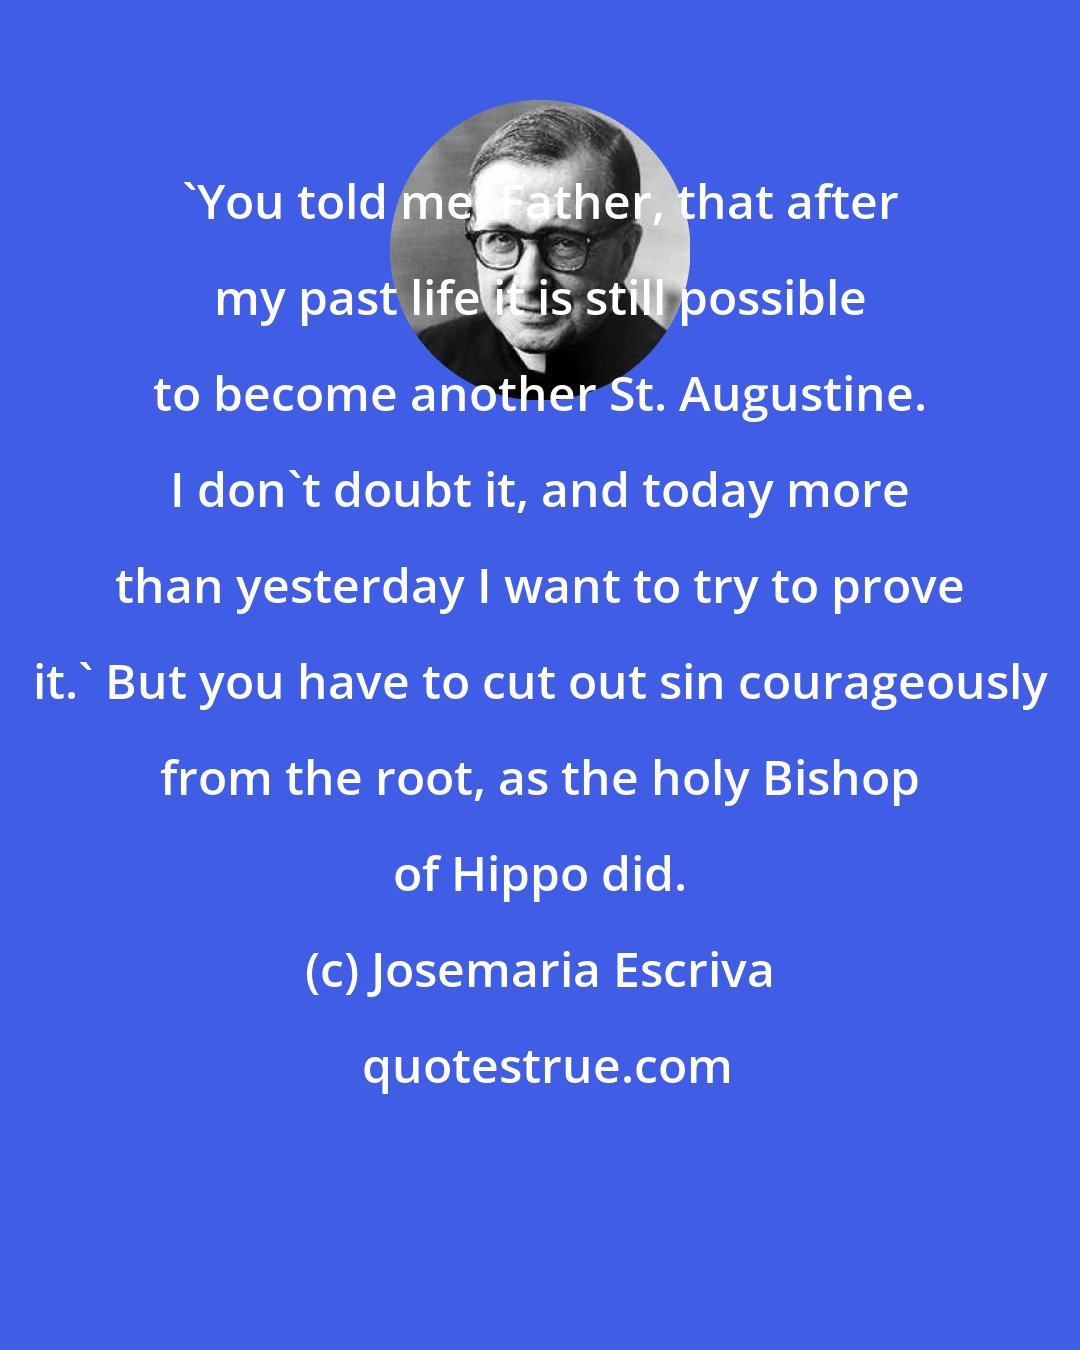 Josemaria Escriva: 'You told me, Father, that after my past life it is still possible to become another St. Augustine. I don't doubt it, and today more than yesterday I want to try to prove it.' But you have to cut out sin courageously from the root, as the holy Bishop of Hippo did.